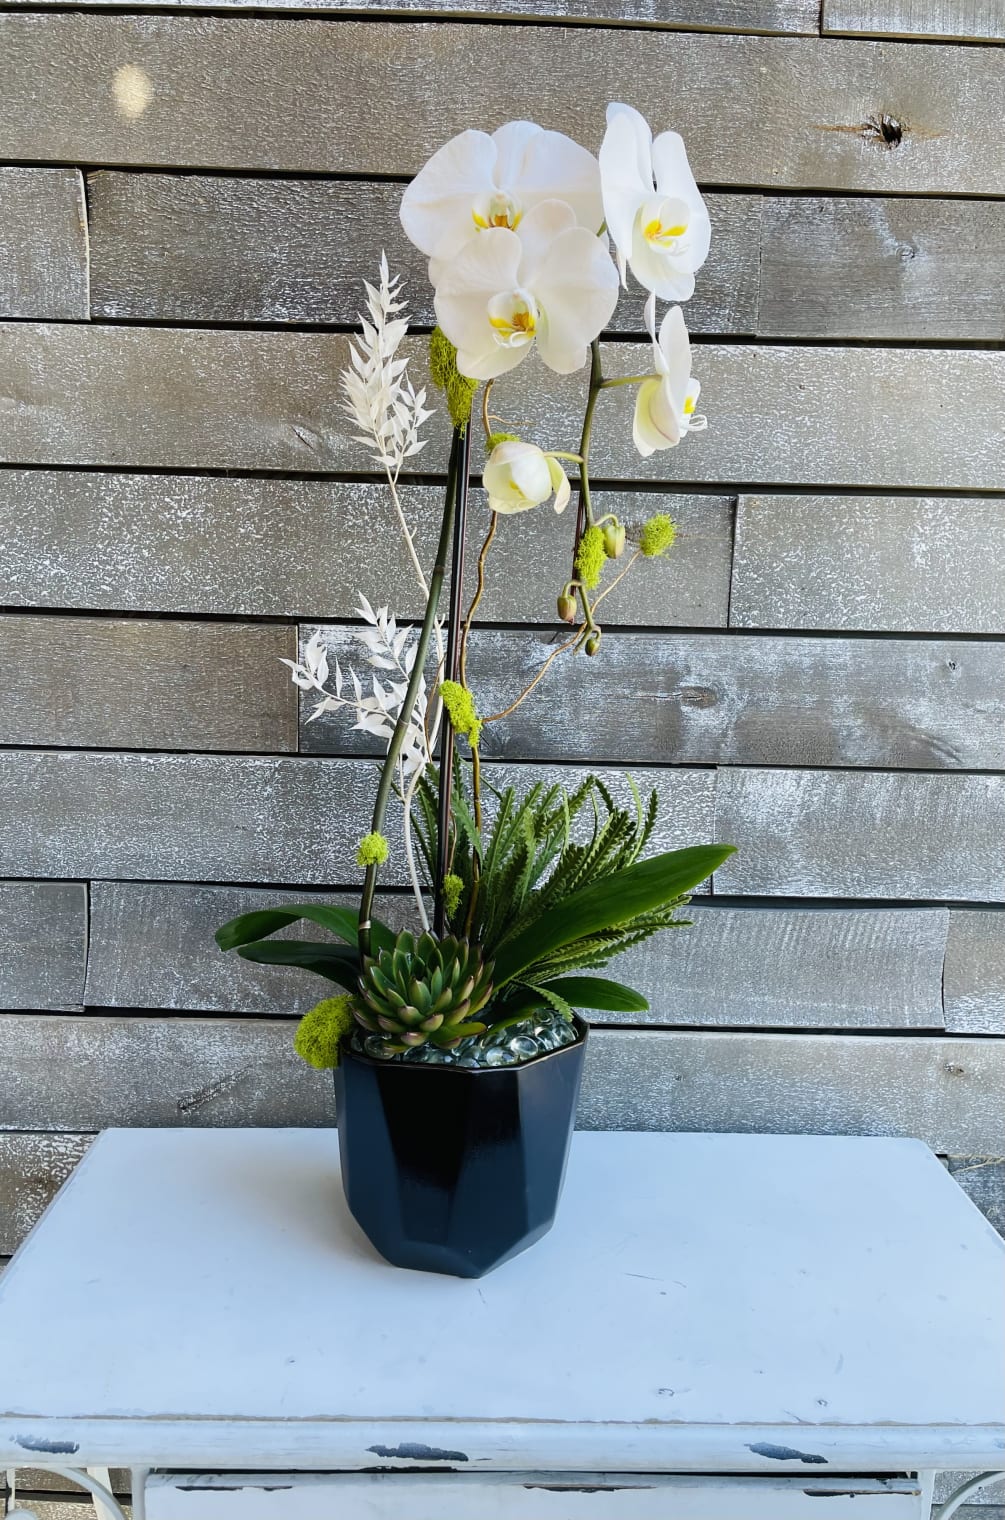 White phalaenopsis orchid in a contemporary container with some fine finishing touches